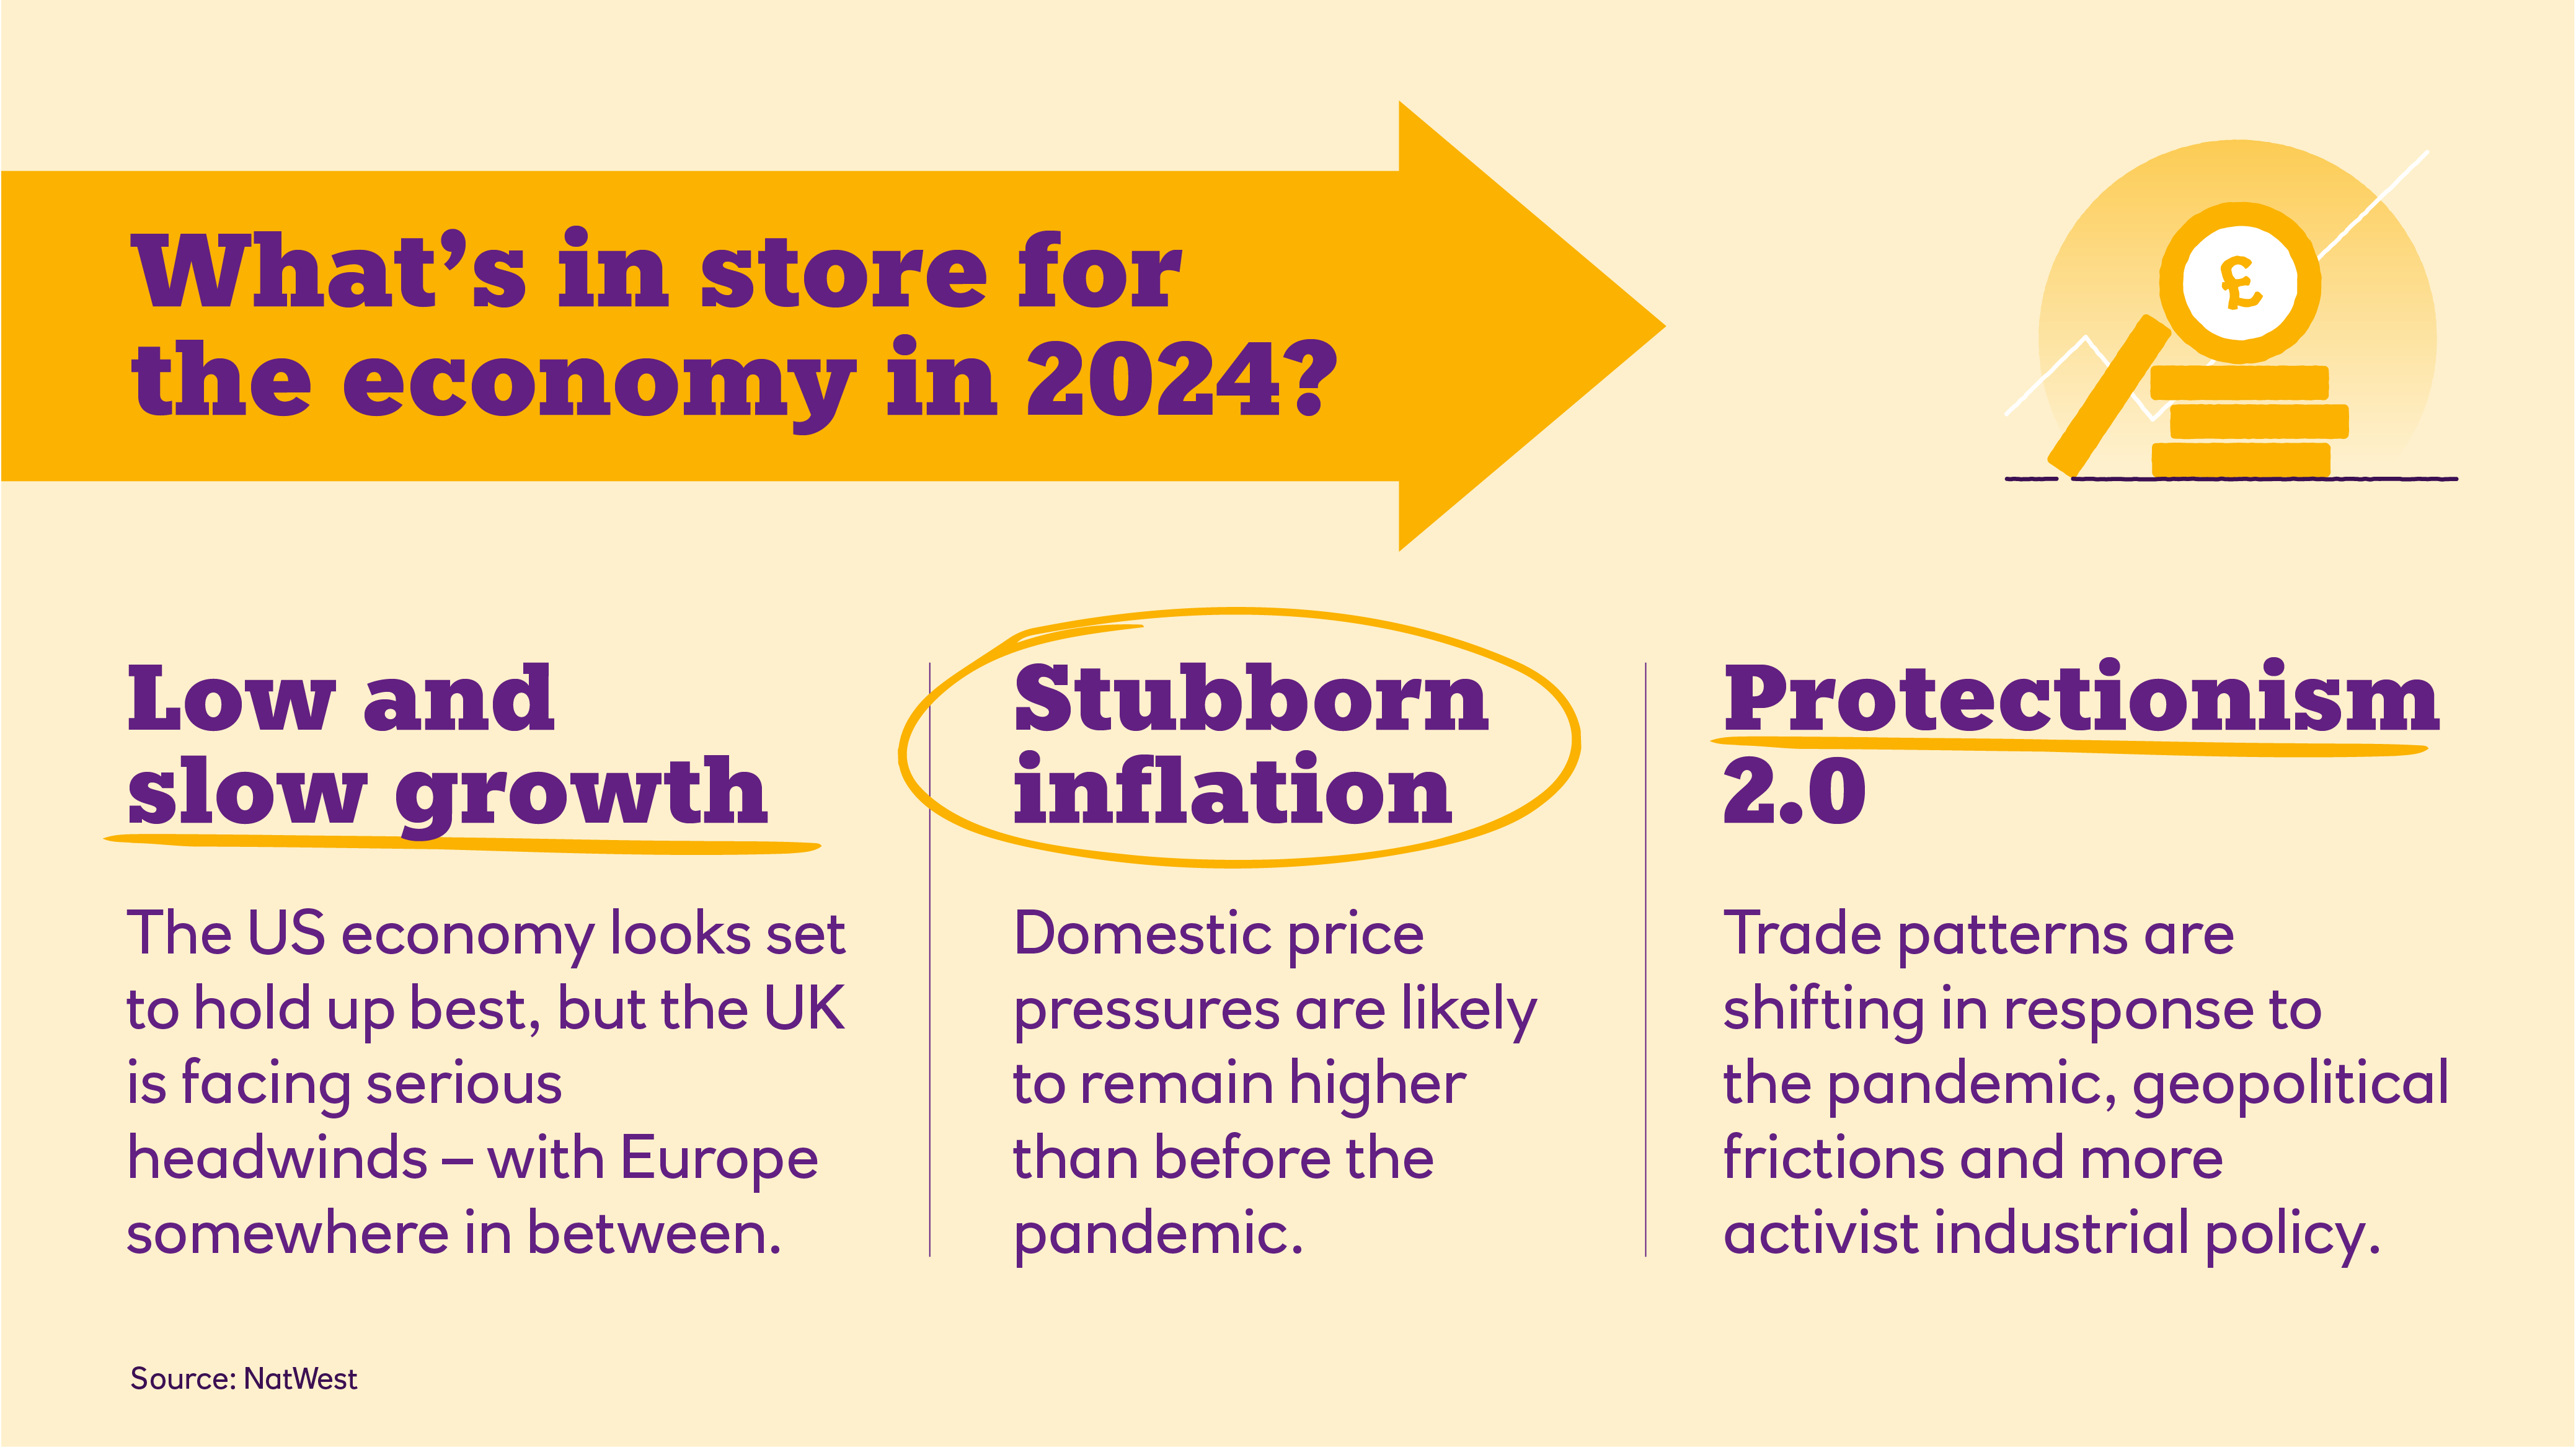 Table of what in store for the economy in 2024